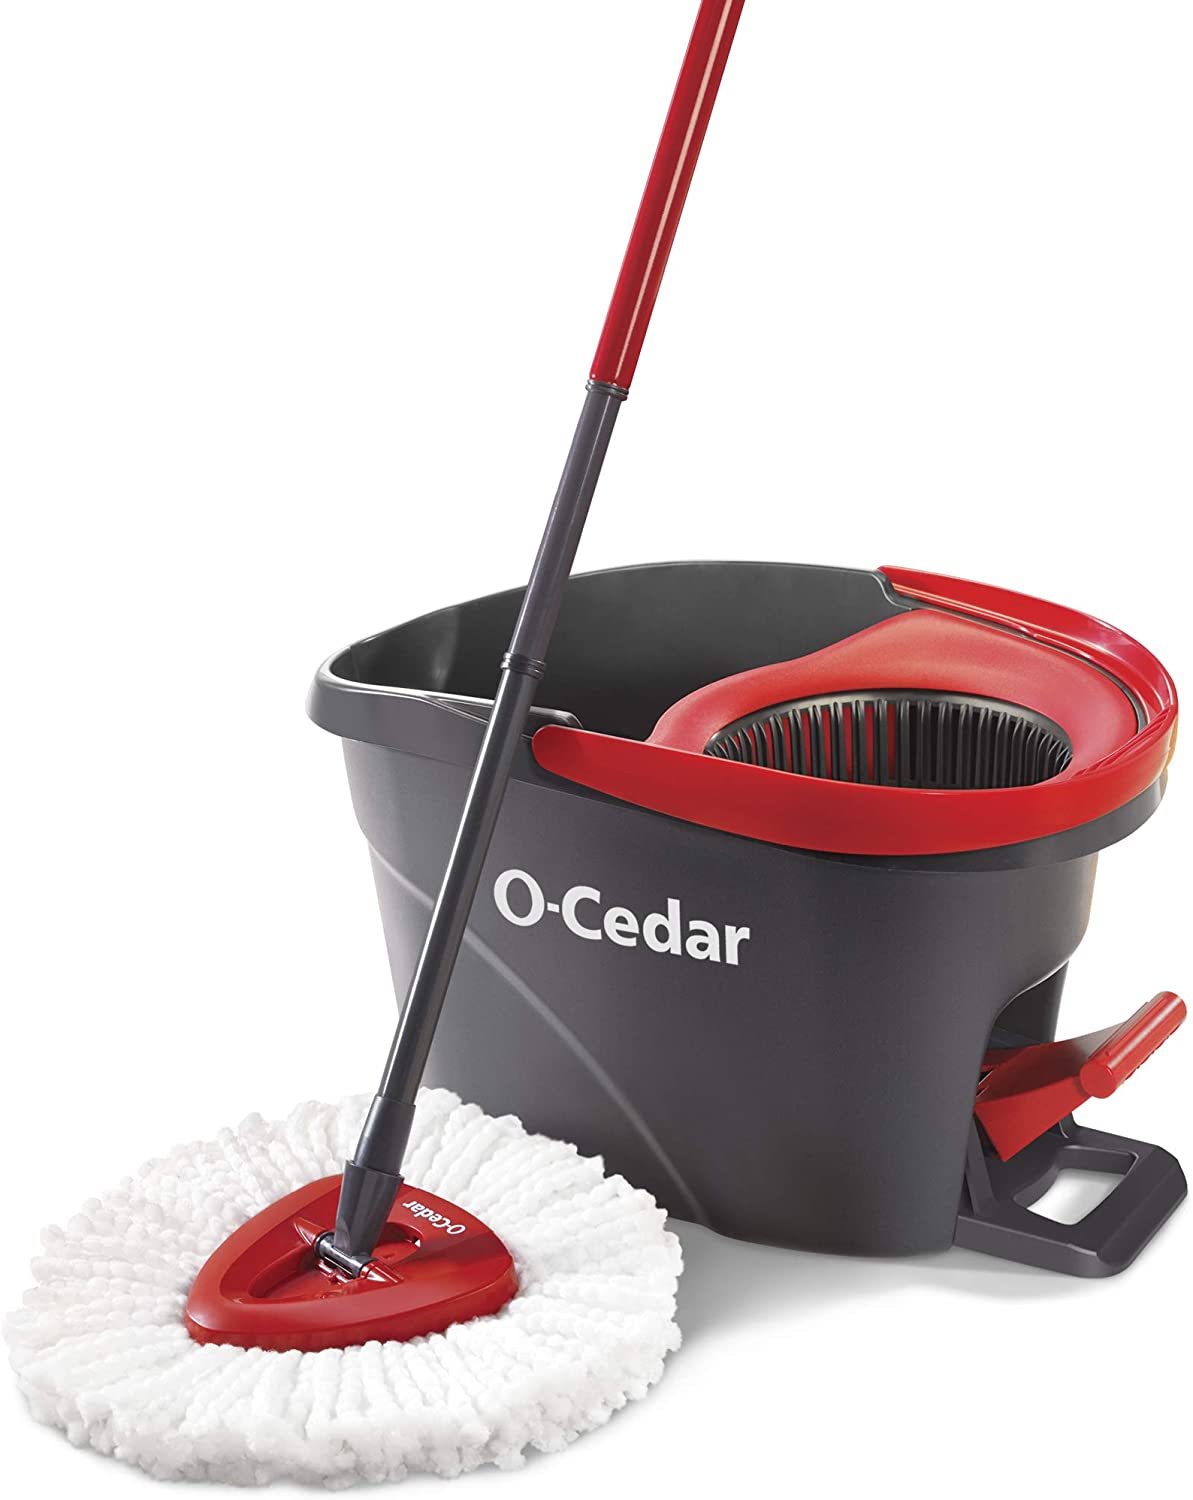 O-Cedar EasyWring Microfiber Spin Mop, Bucket Floor Cleaning System, Red, Gray 39